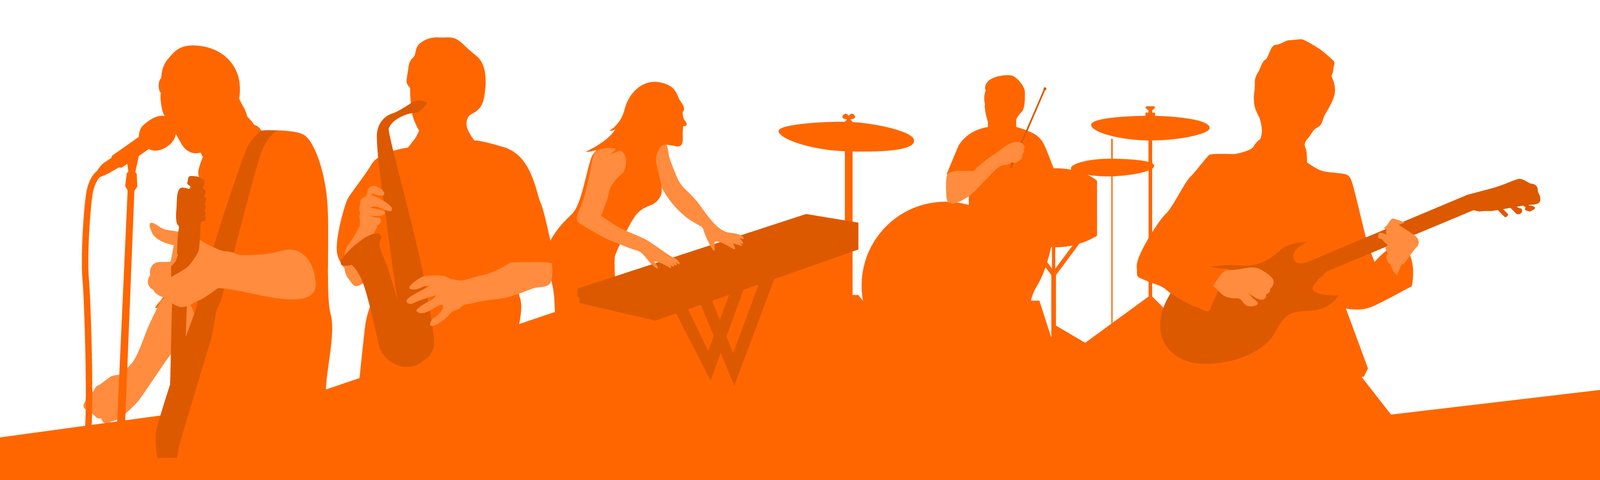 a silhouette of people with music instruments standing on a hill